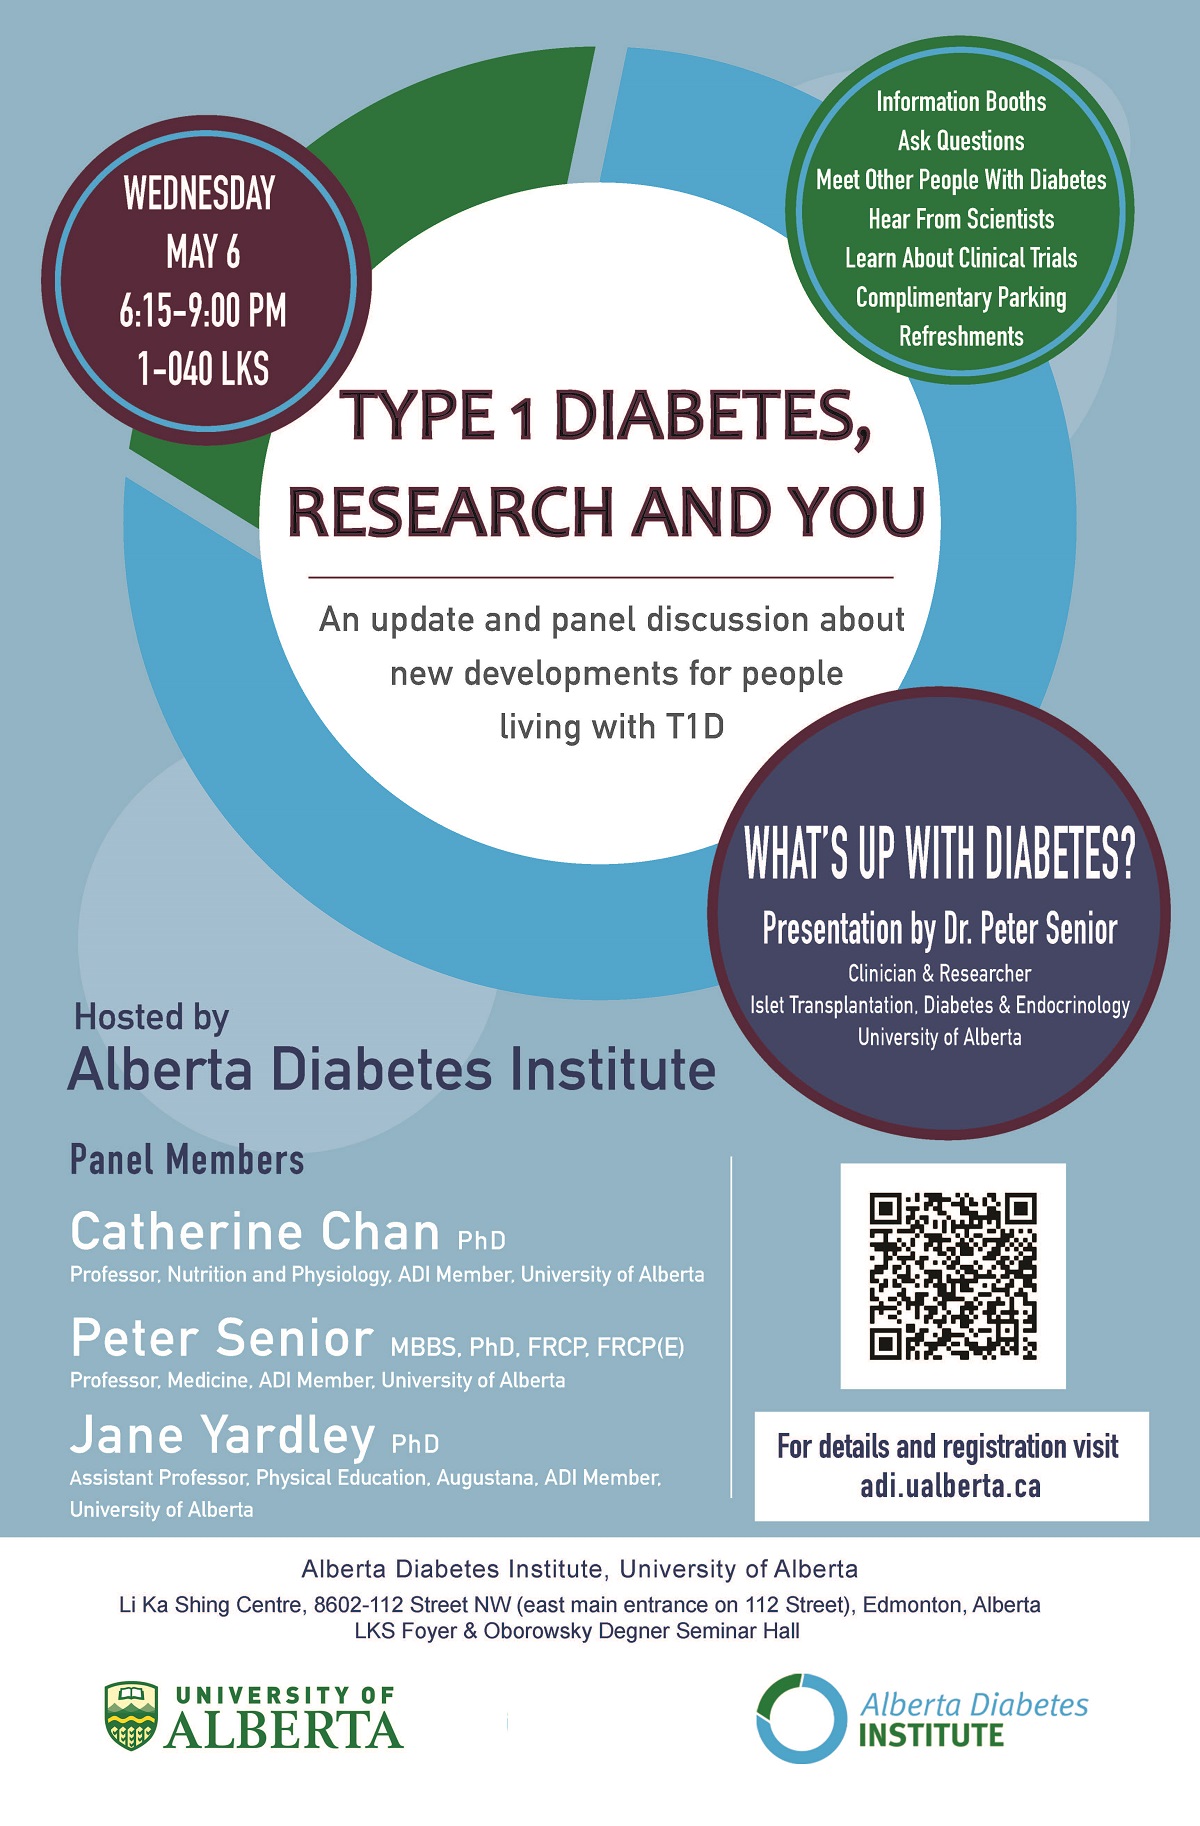 current research being done on type 1 diabetes